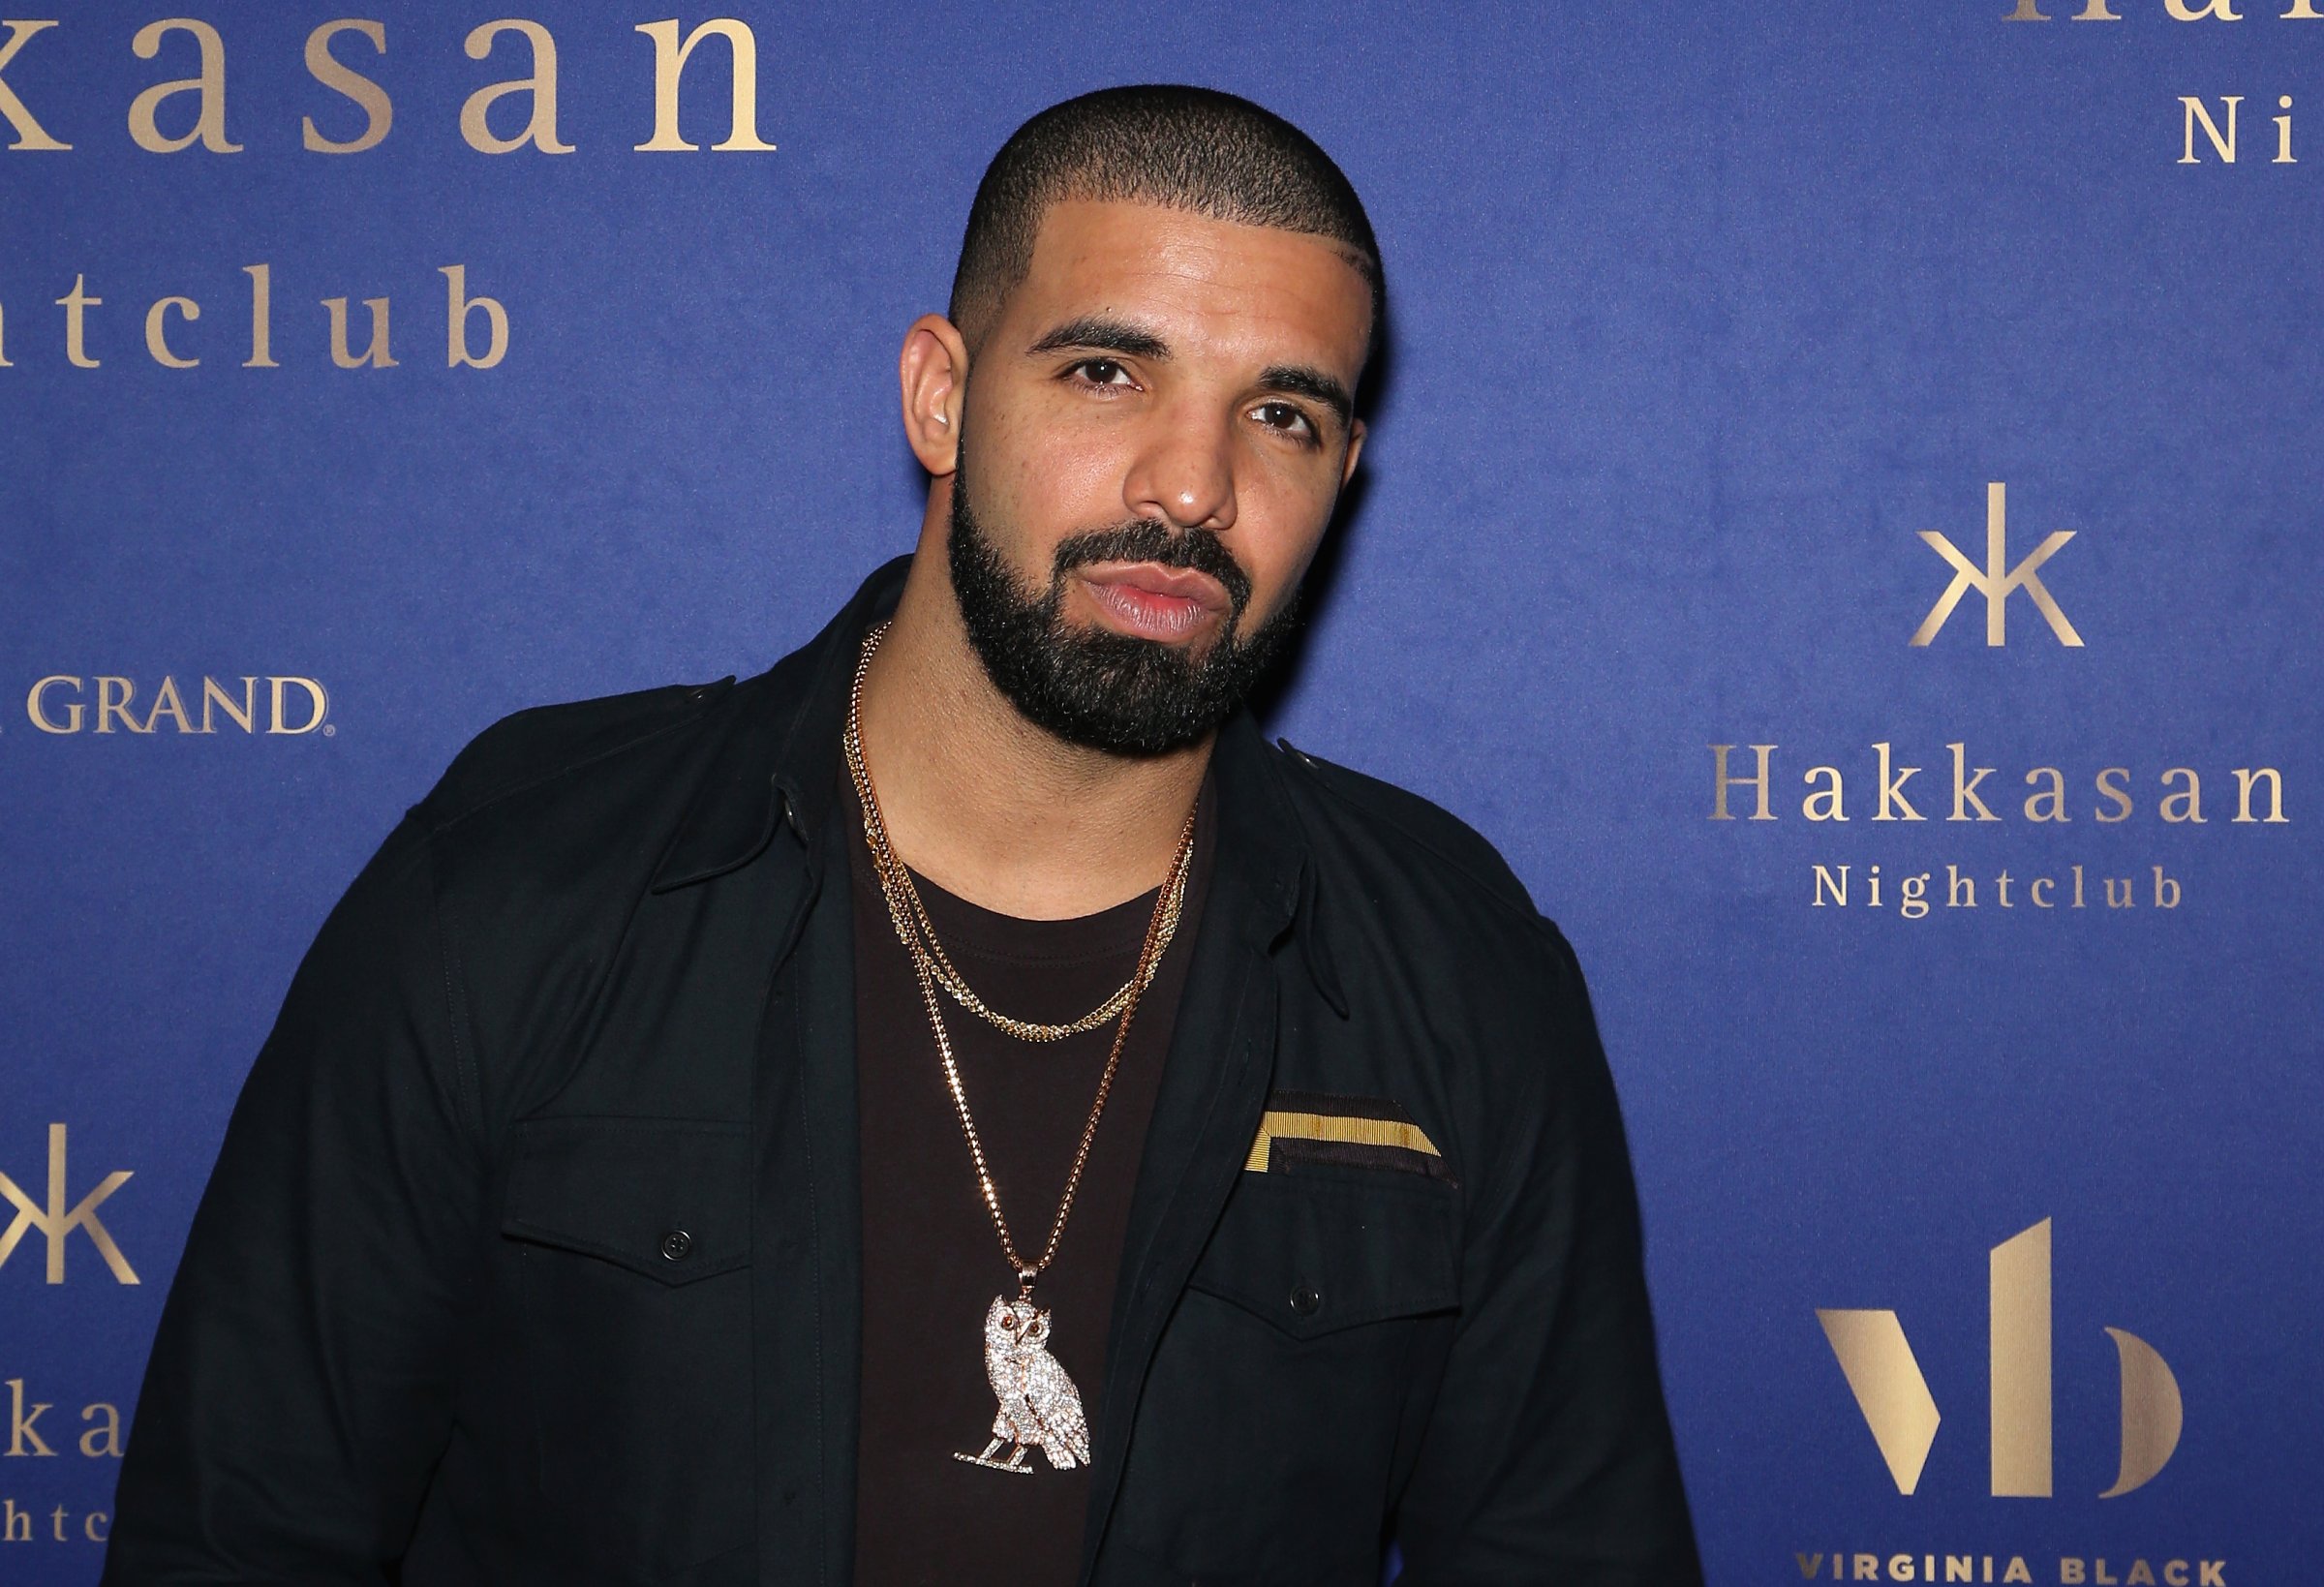 Recording artist Drake attends the after party for his concert at Hakkasan Las Vegas Nightclub at MGM Grand Hotel &amp; Casino on September 12, 2016 in Las Vegas, Nevada.